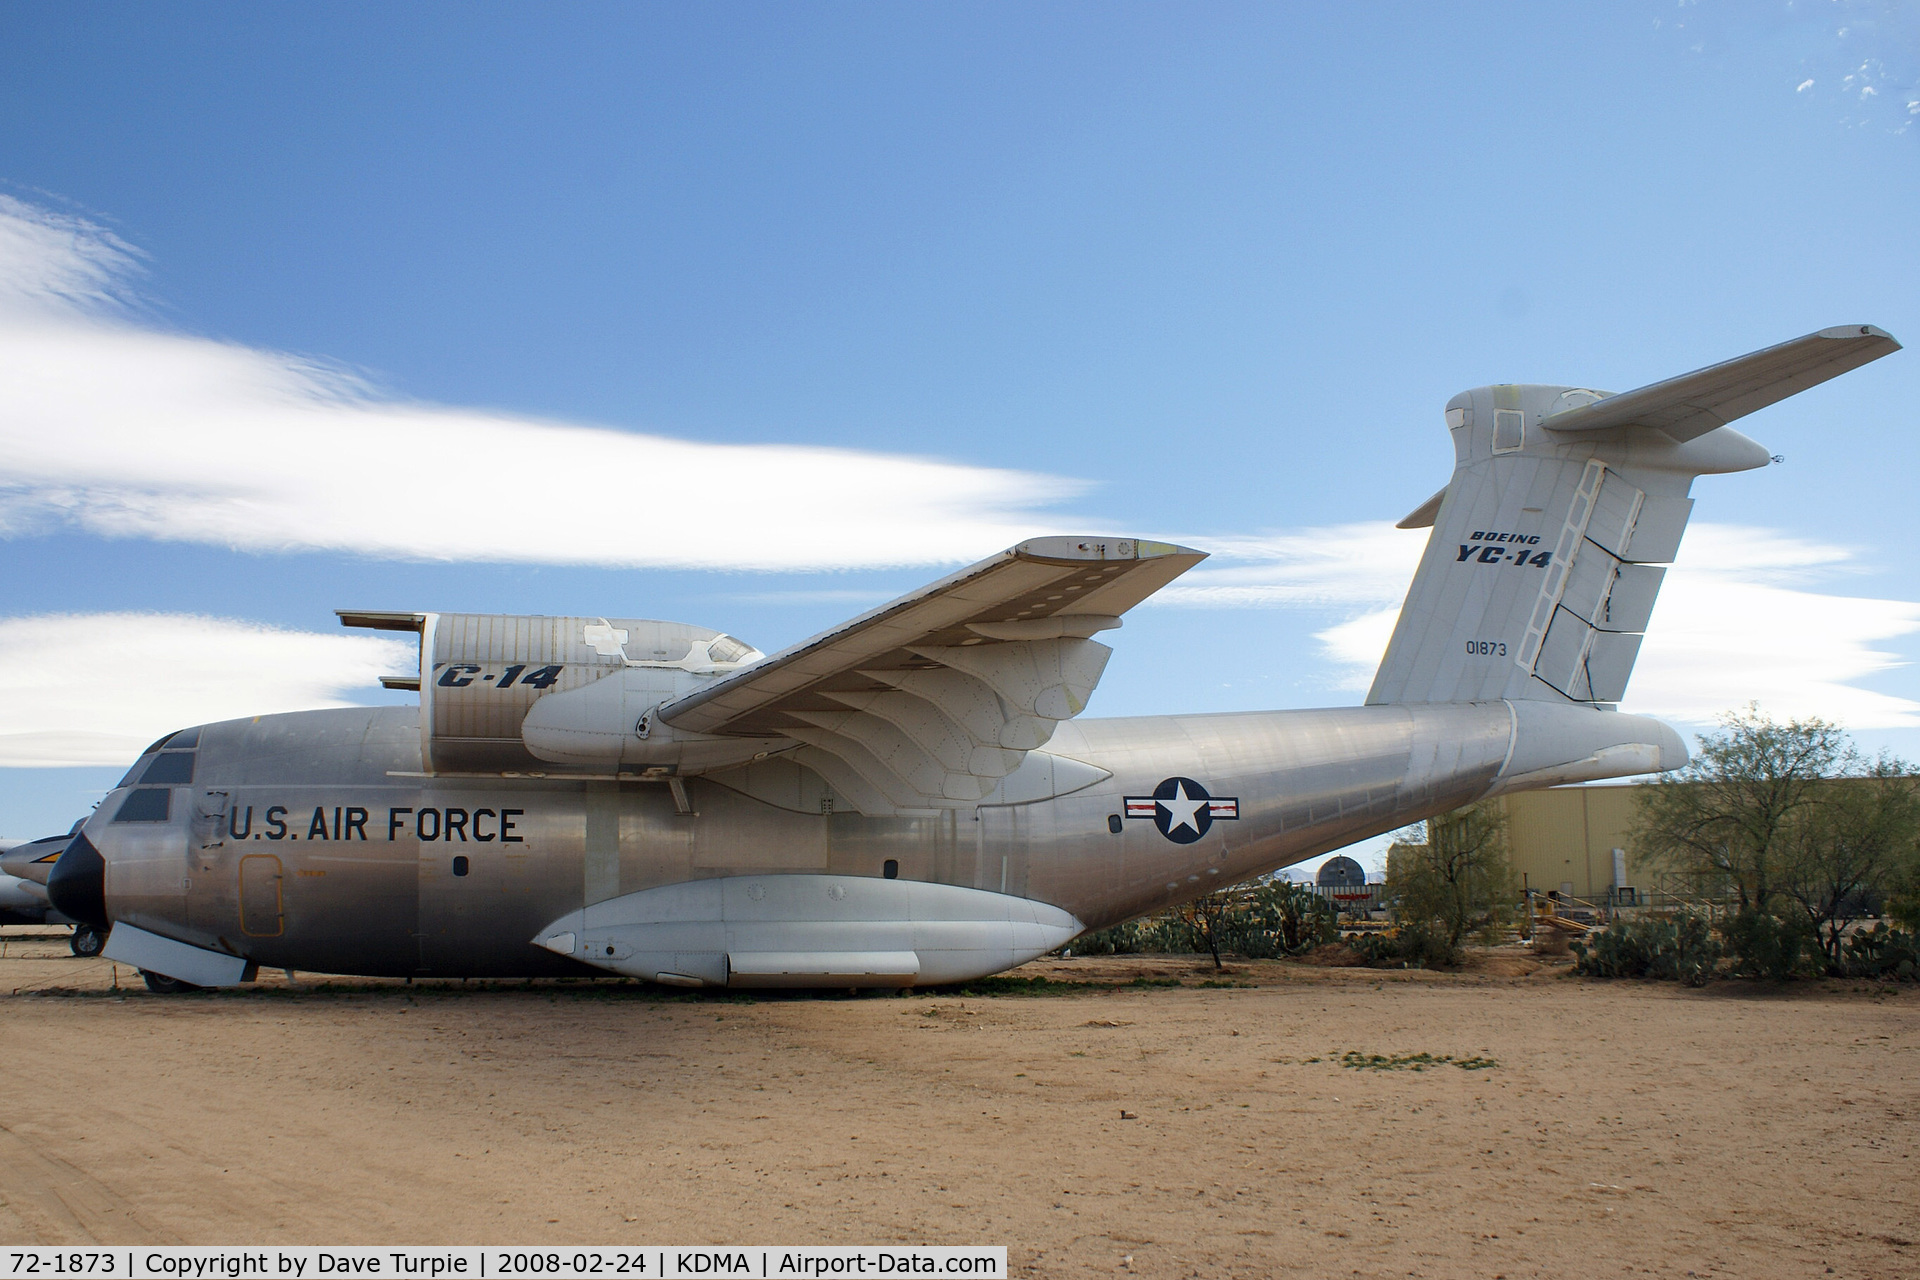 72-1873, 1972 Boeing YC-14A-BN C/N P 1, Located at Pima Air & Space Museum, adjacent to KDMA. This will be the final resting place for this plane.